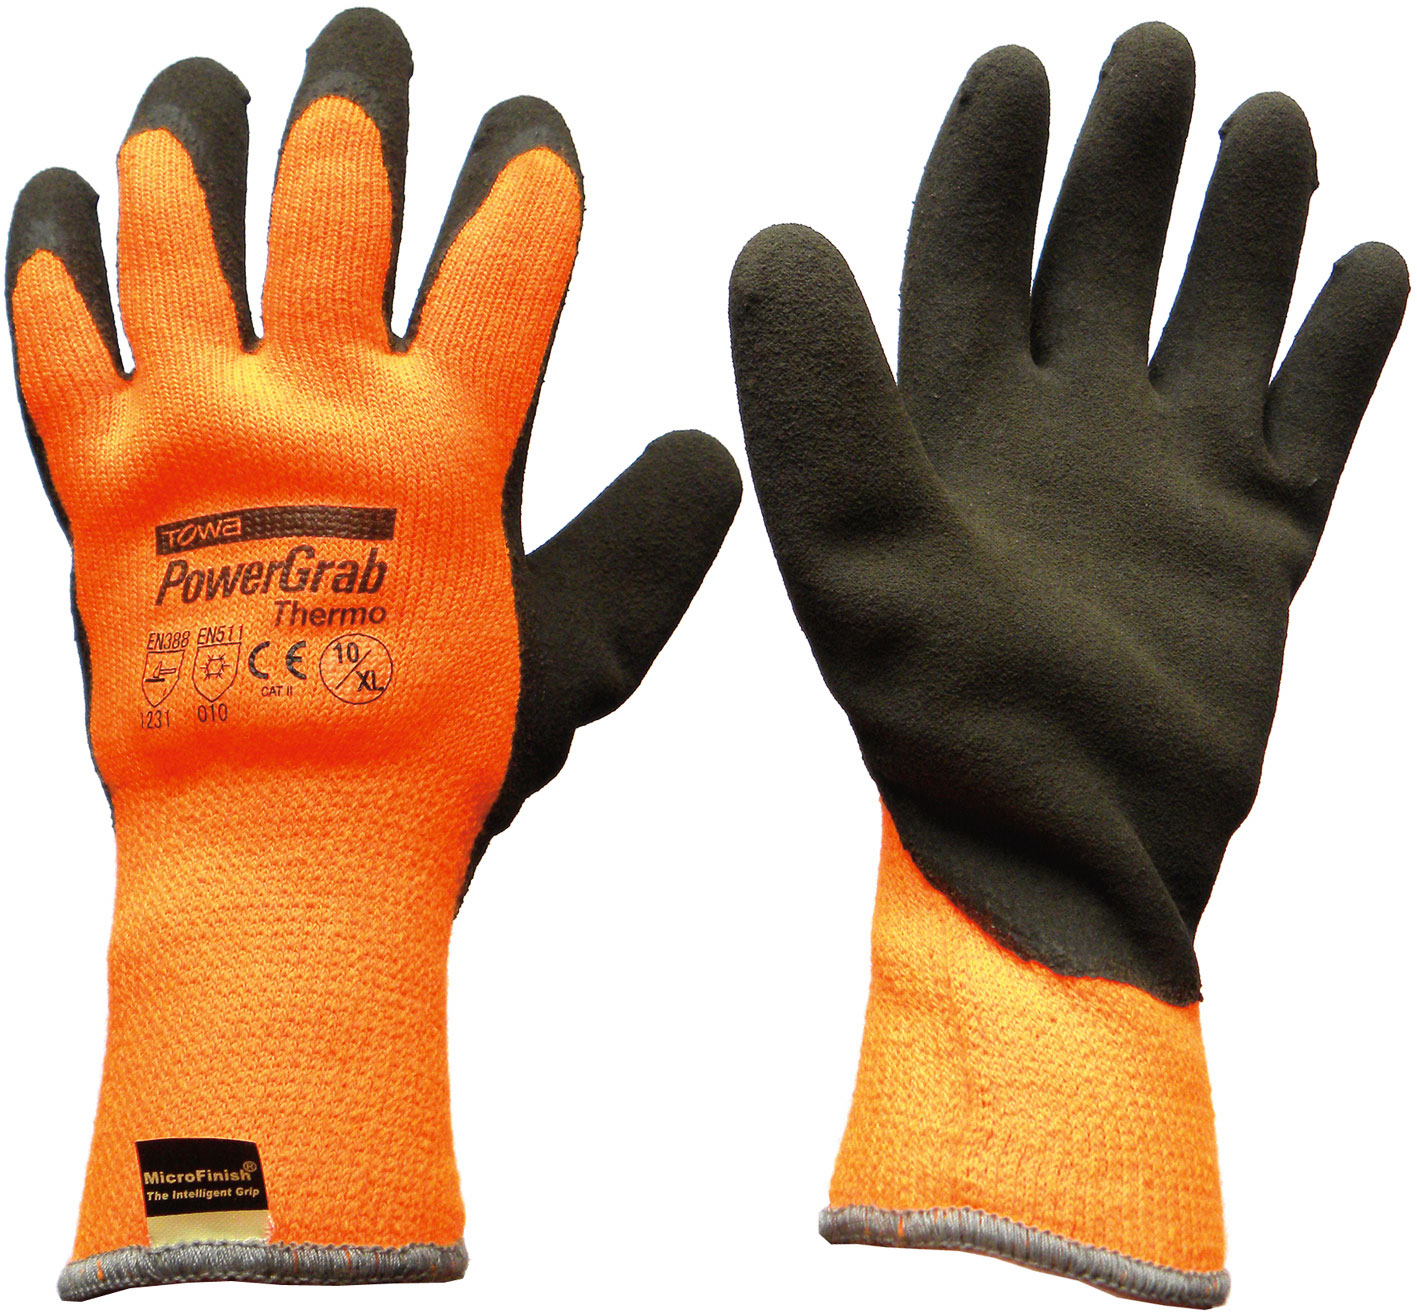 OFFER PC15 P/Grab Thermo Gloves LARGE ORANGE Towa